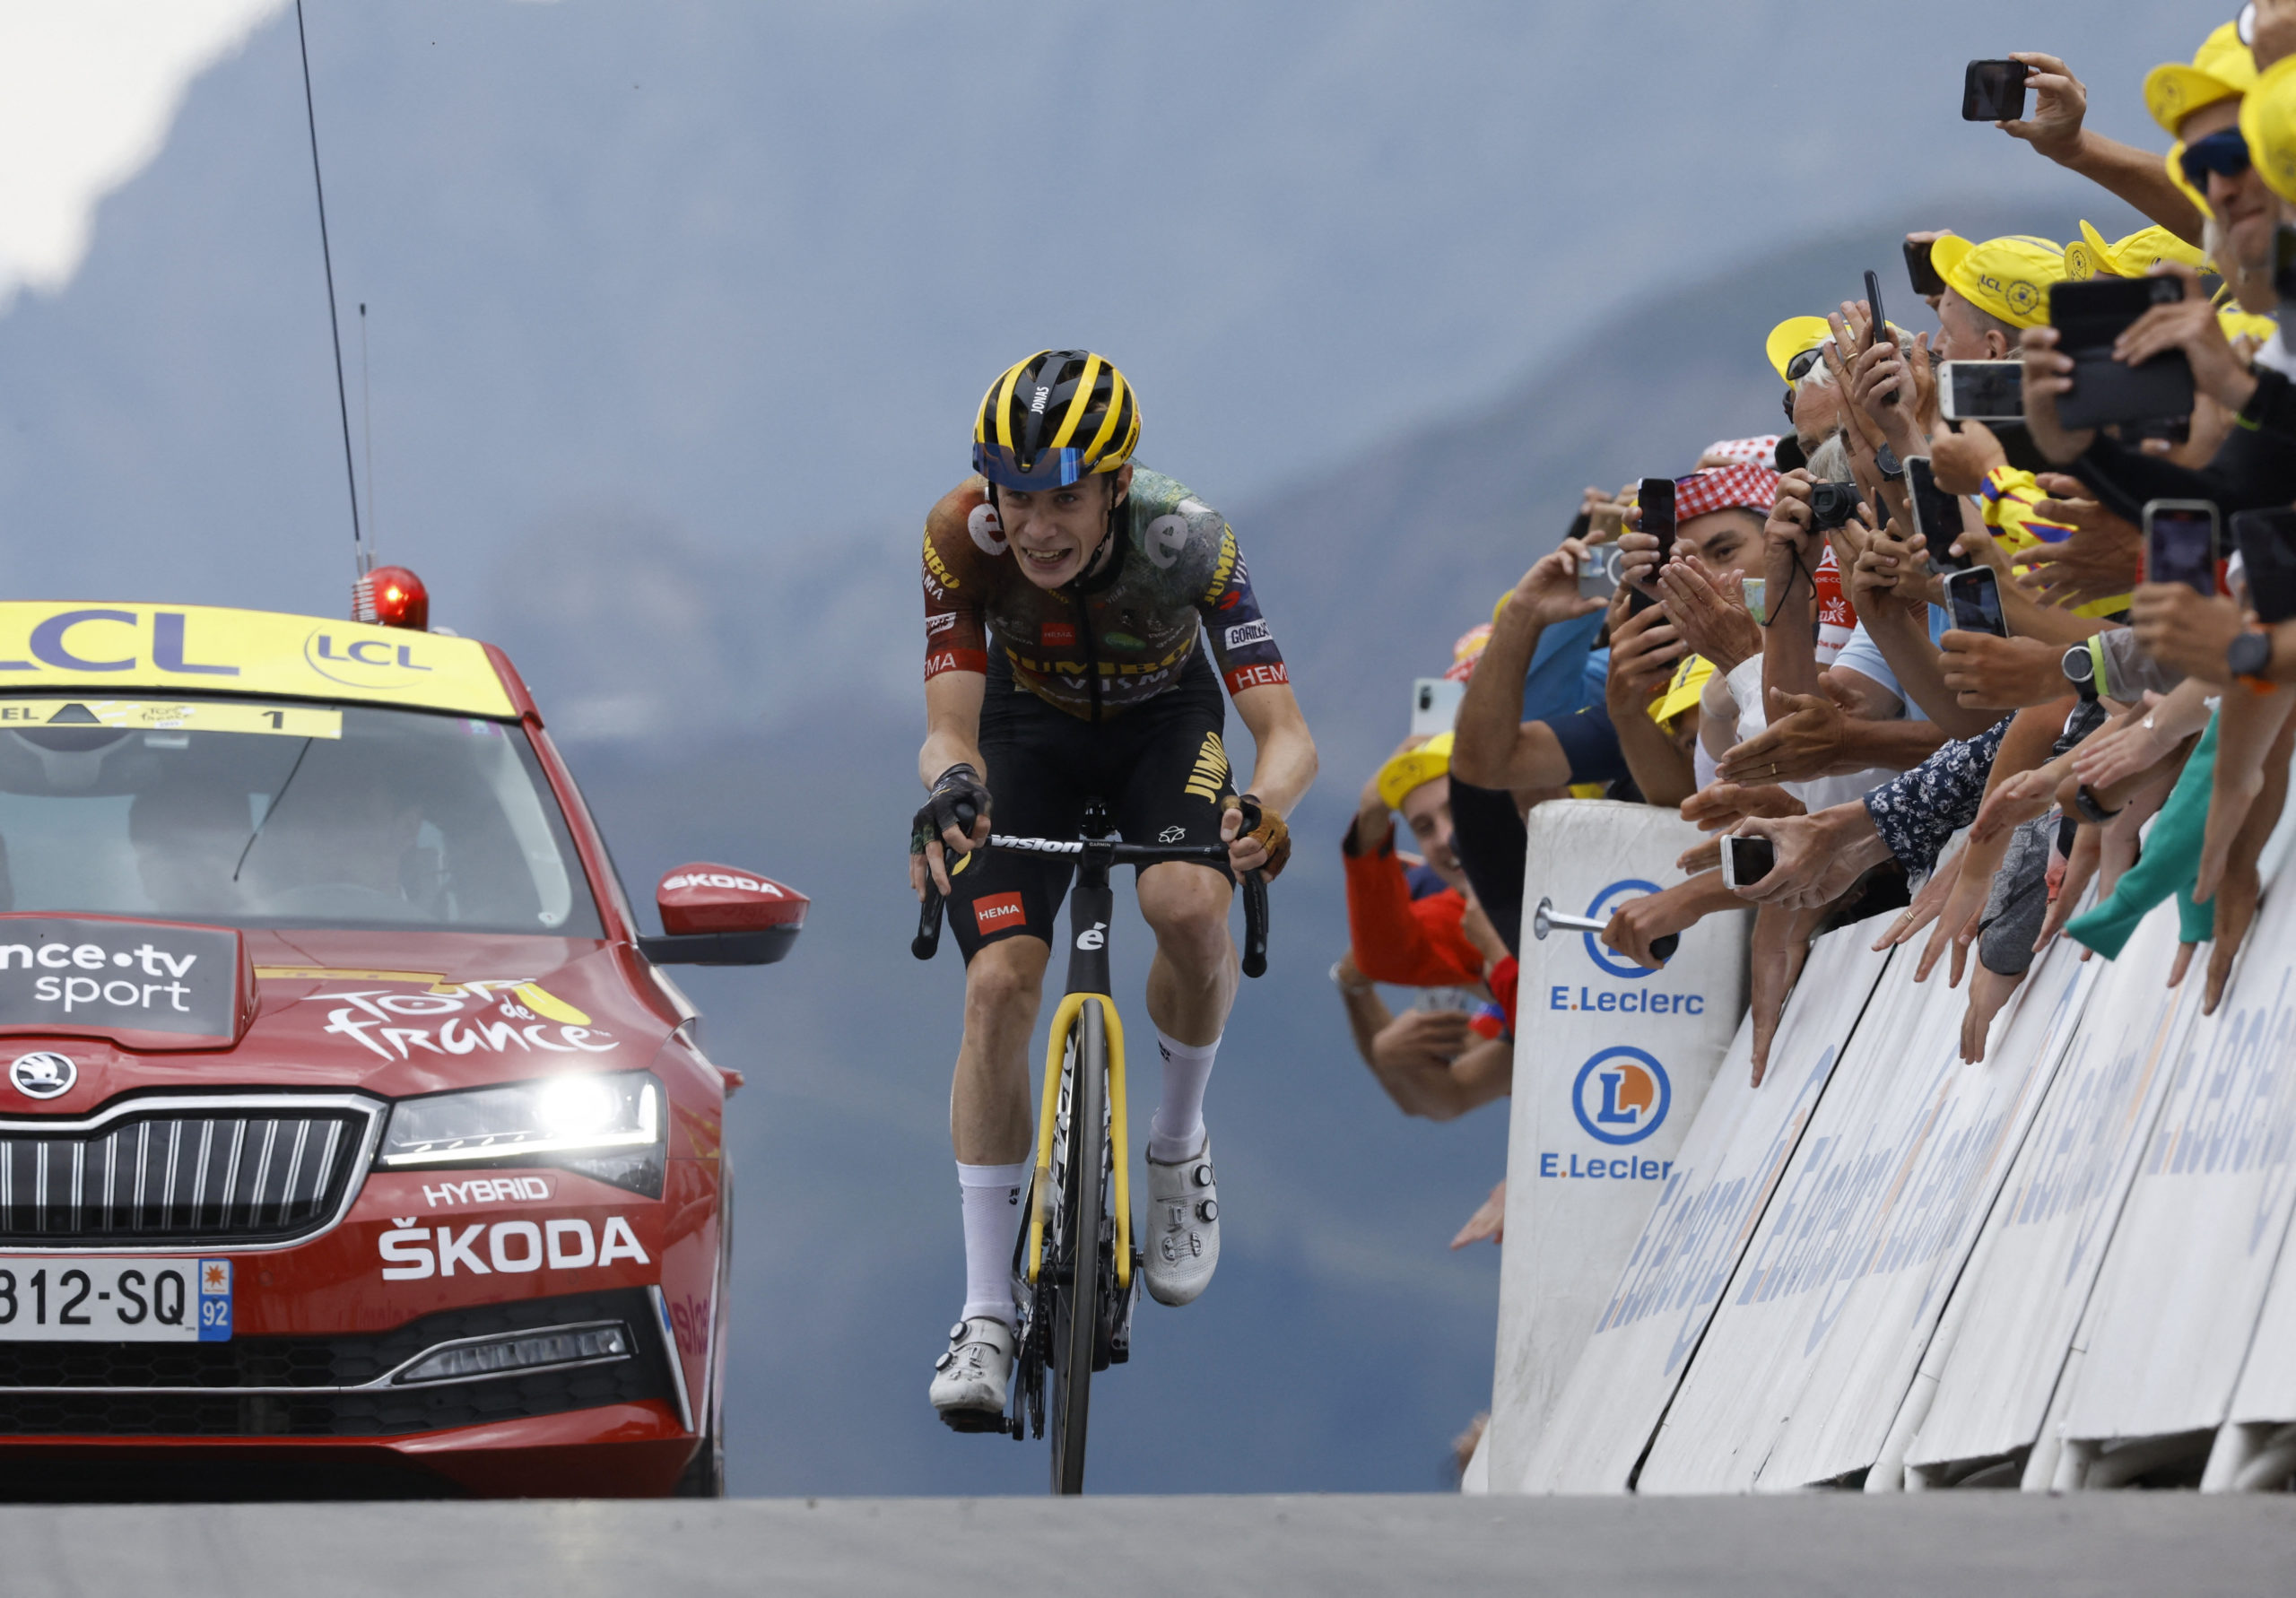 Jumbo - Visma's Jonas Vingegaard in action before he crosses the finish line to win stage 11 of the tour de france